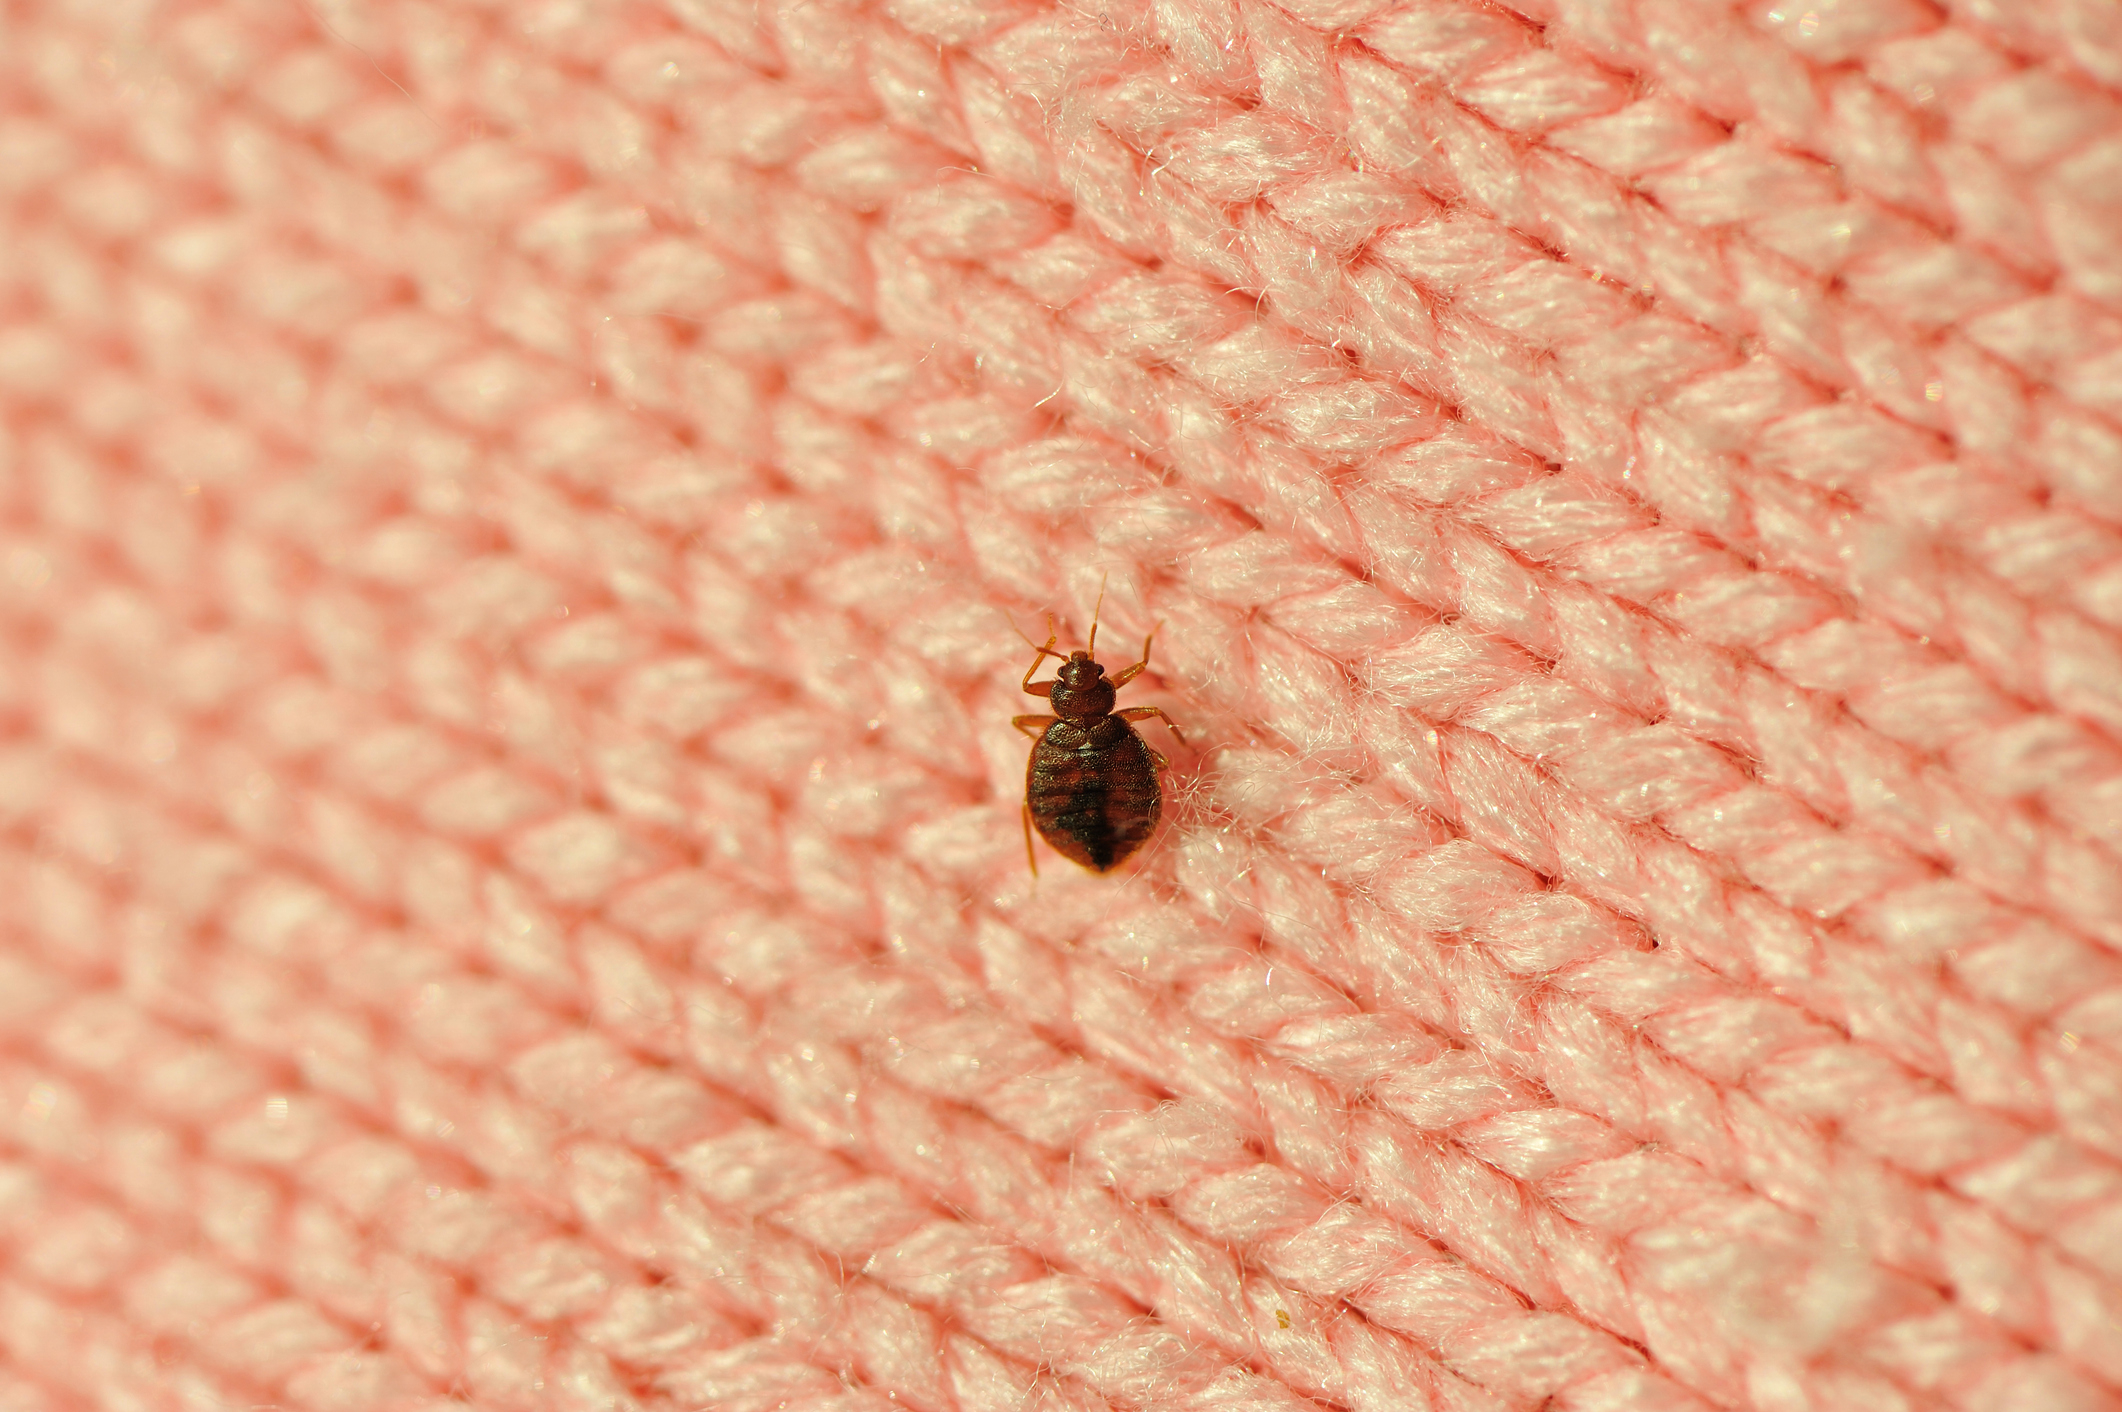 A bed bug seen on a woven blanket